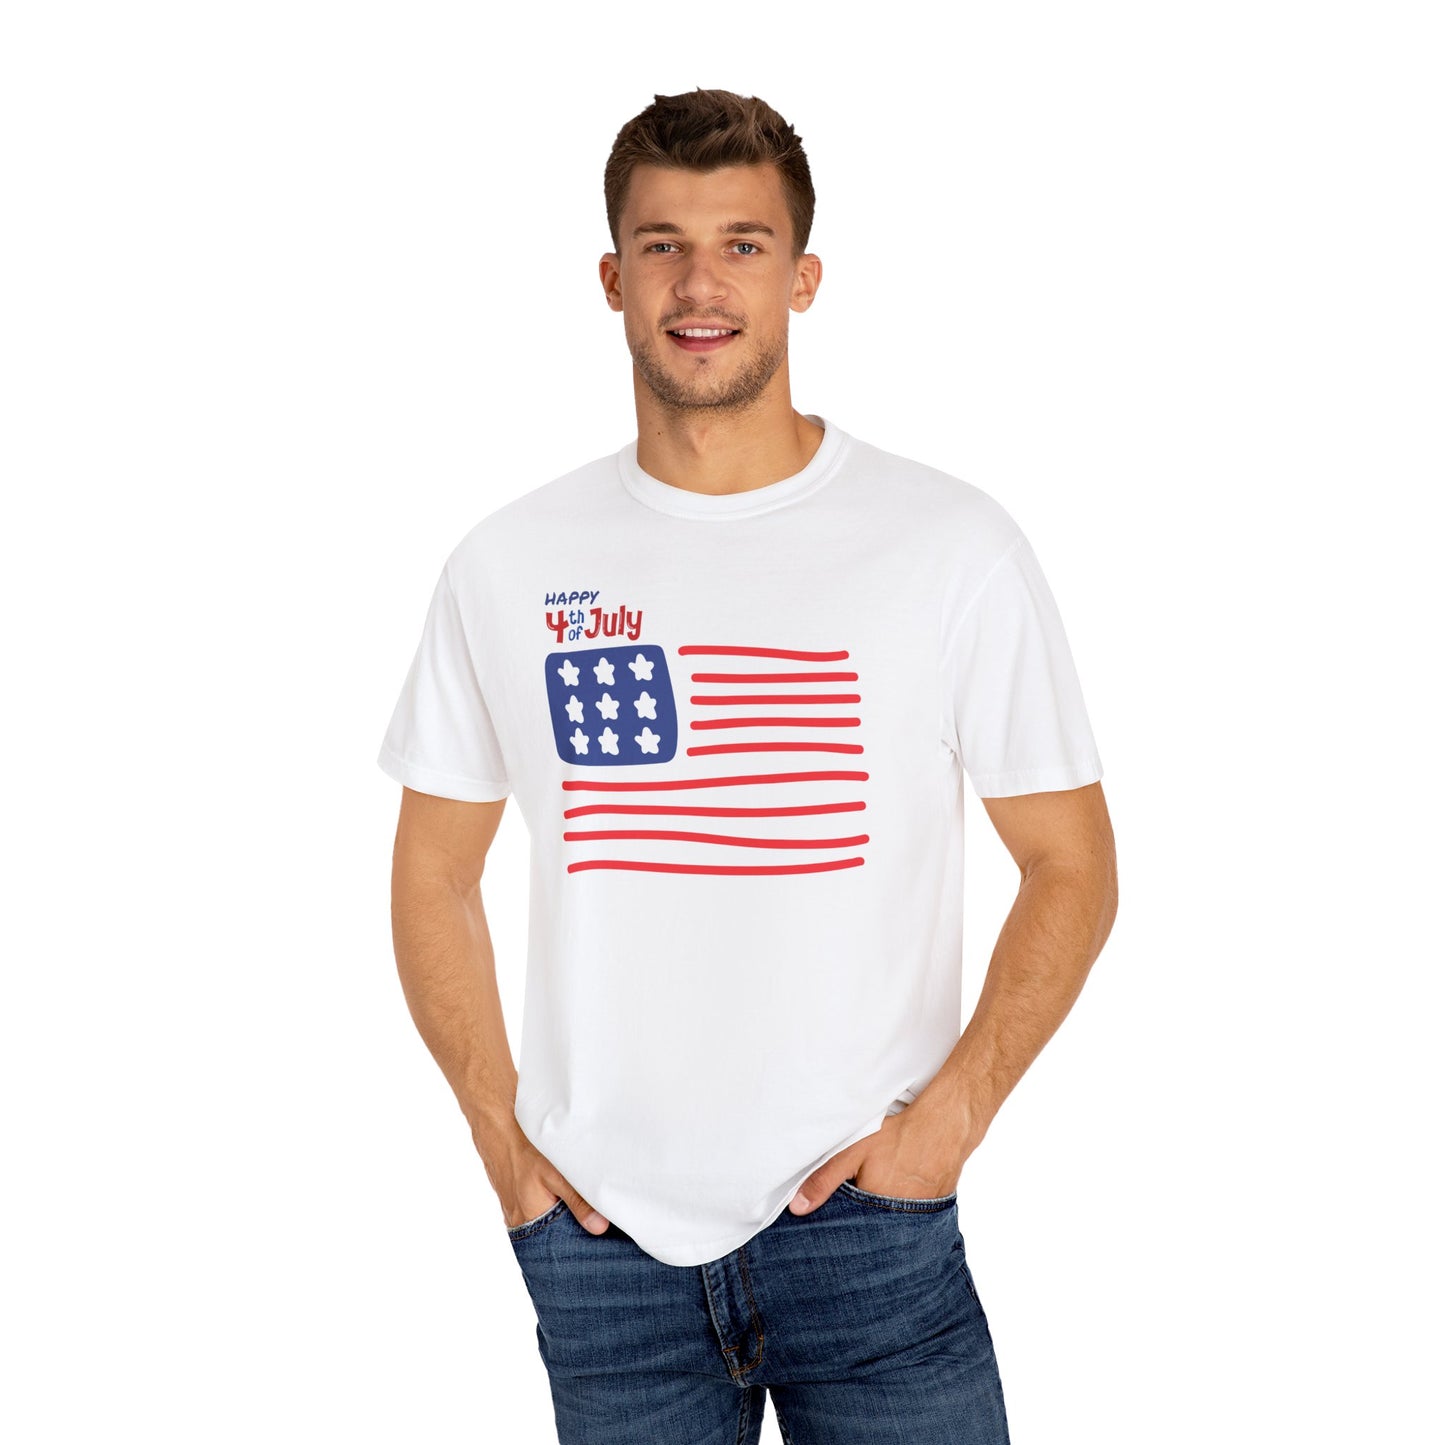 Happy 4th of July Unisex Garment-Dyed T-shirt